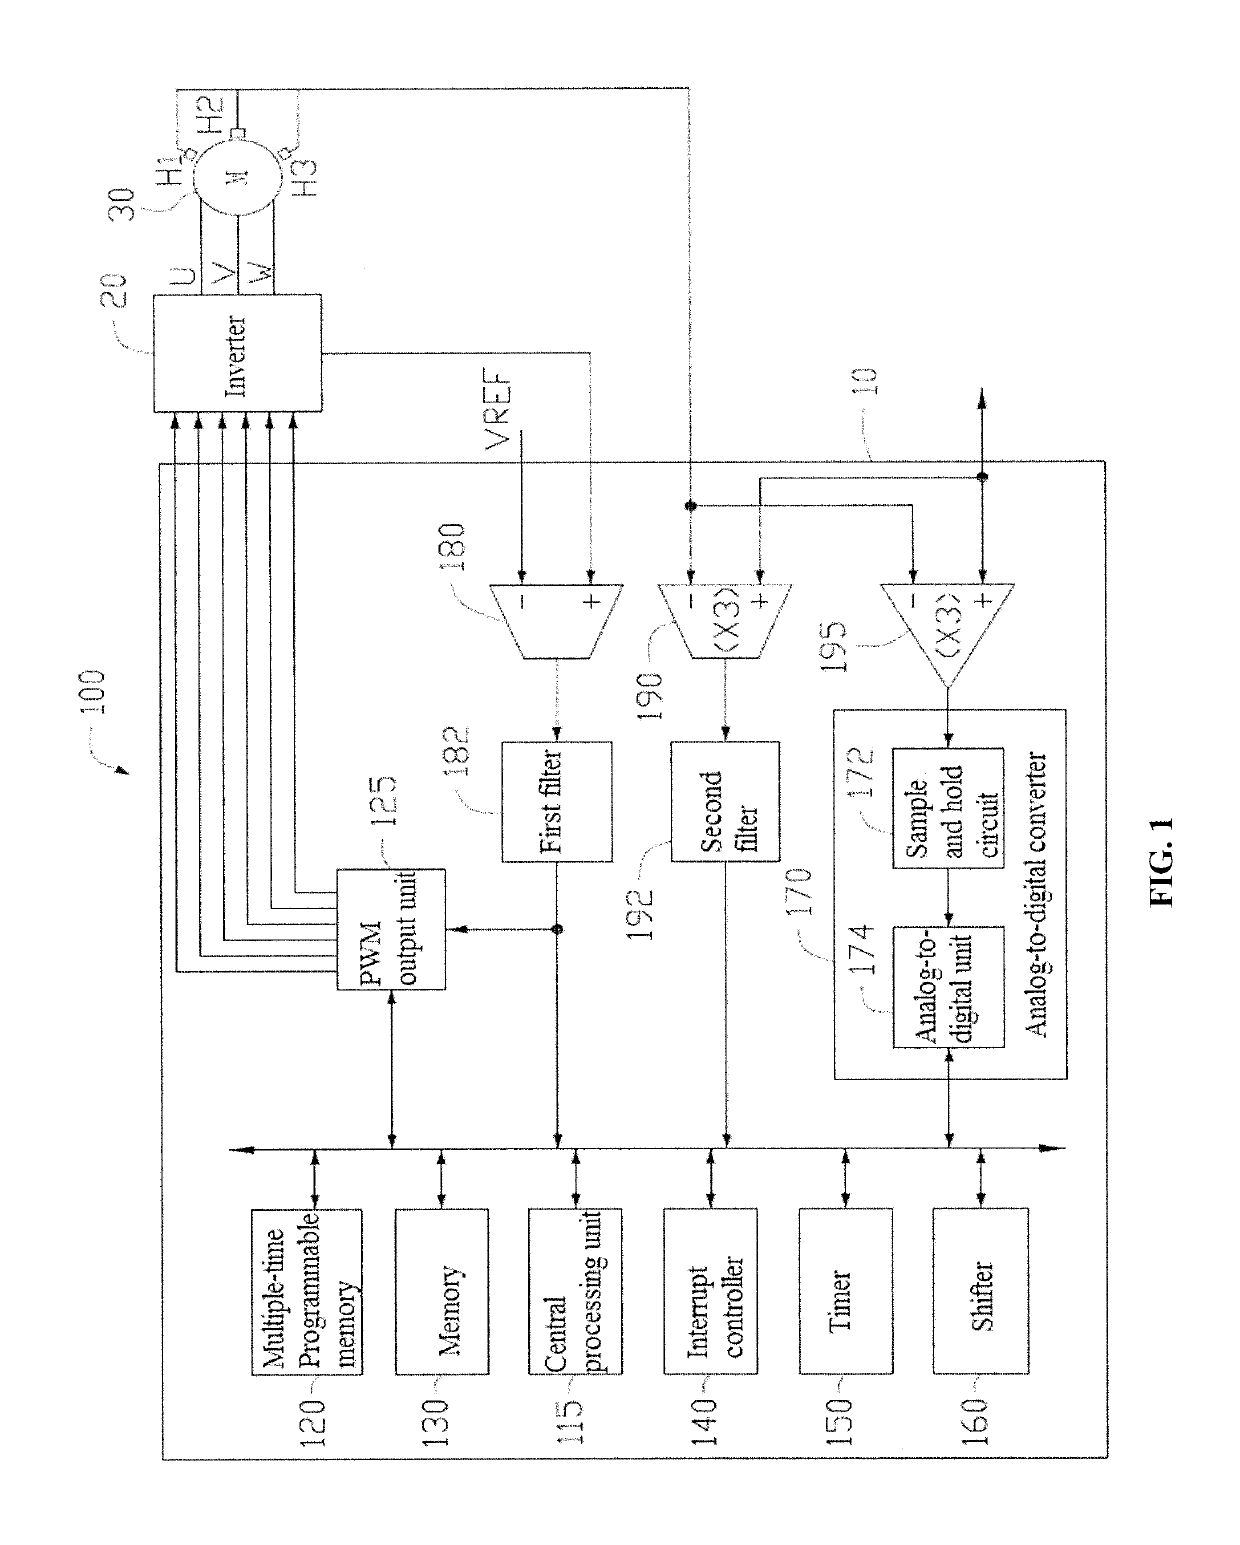 Motor-driven integrated circuit, motor device, and application apparatus